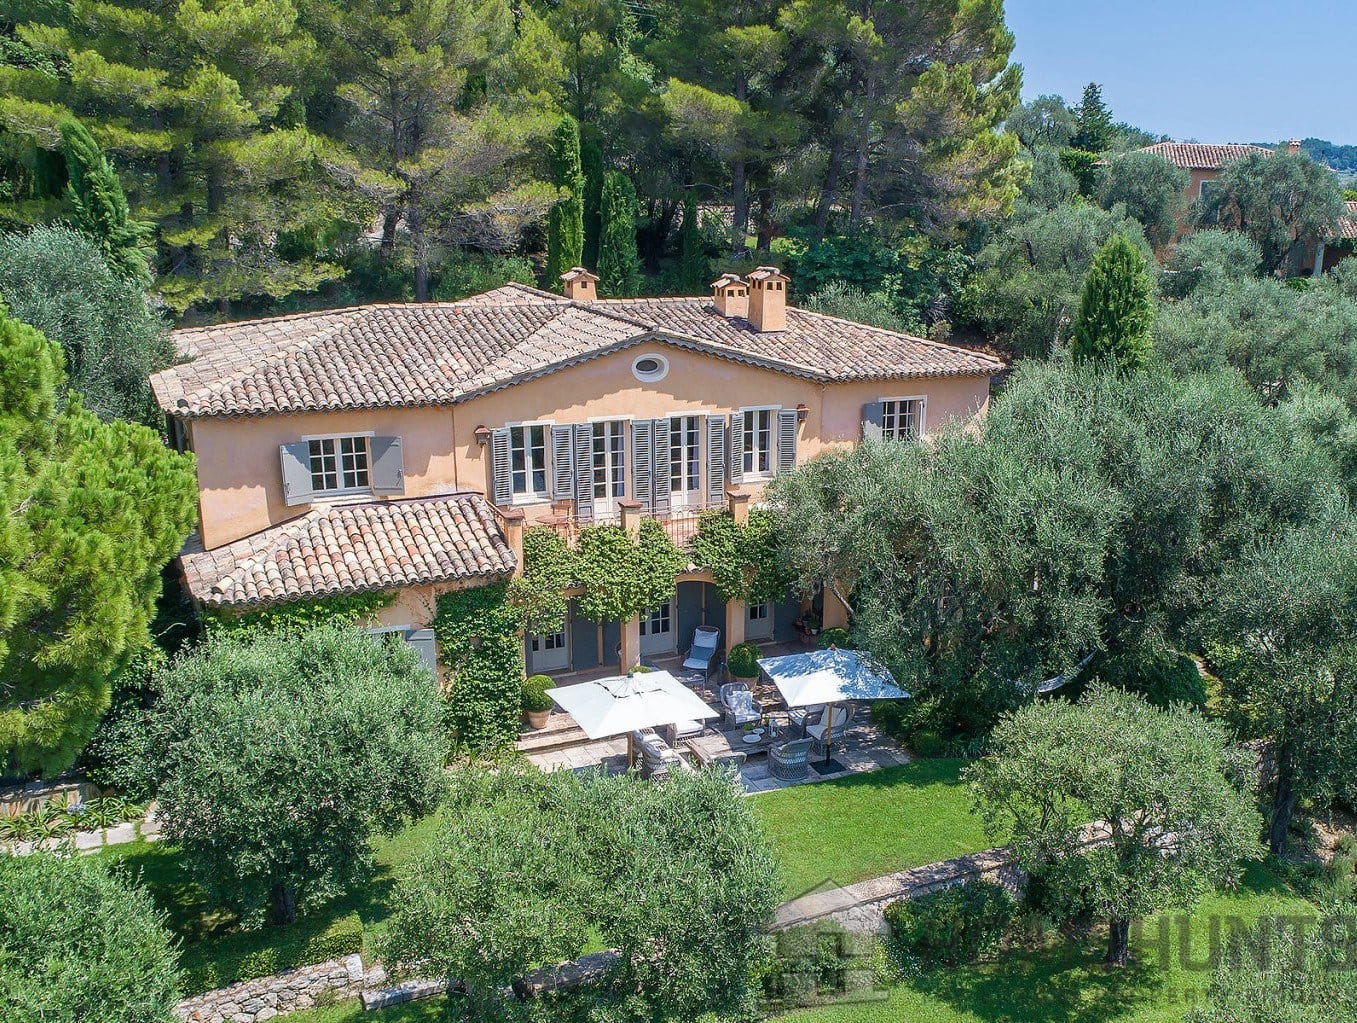 12 Bedroom Castle/Estates in Chateauneuf Grasse 8